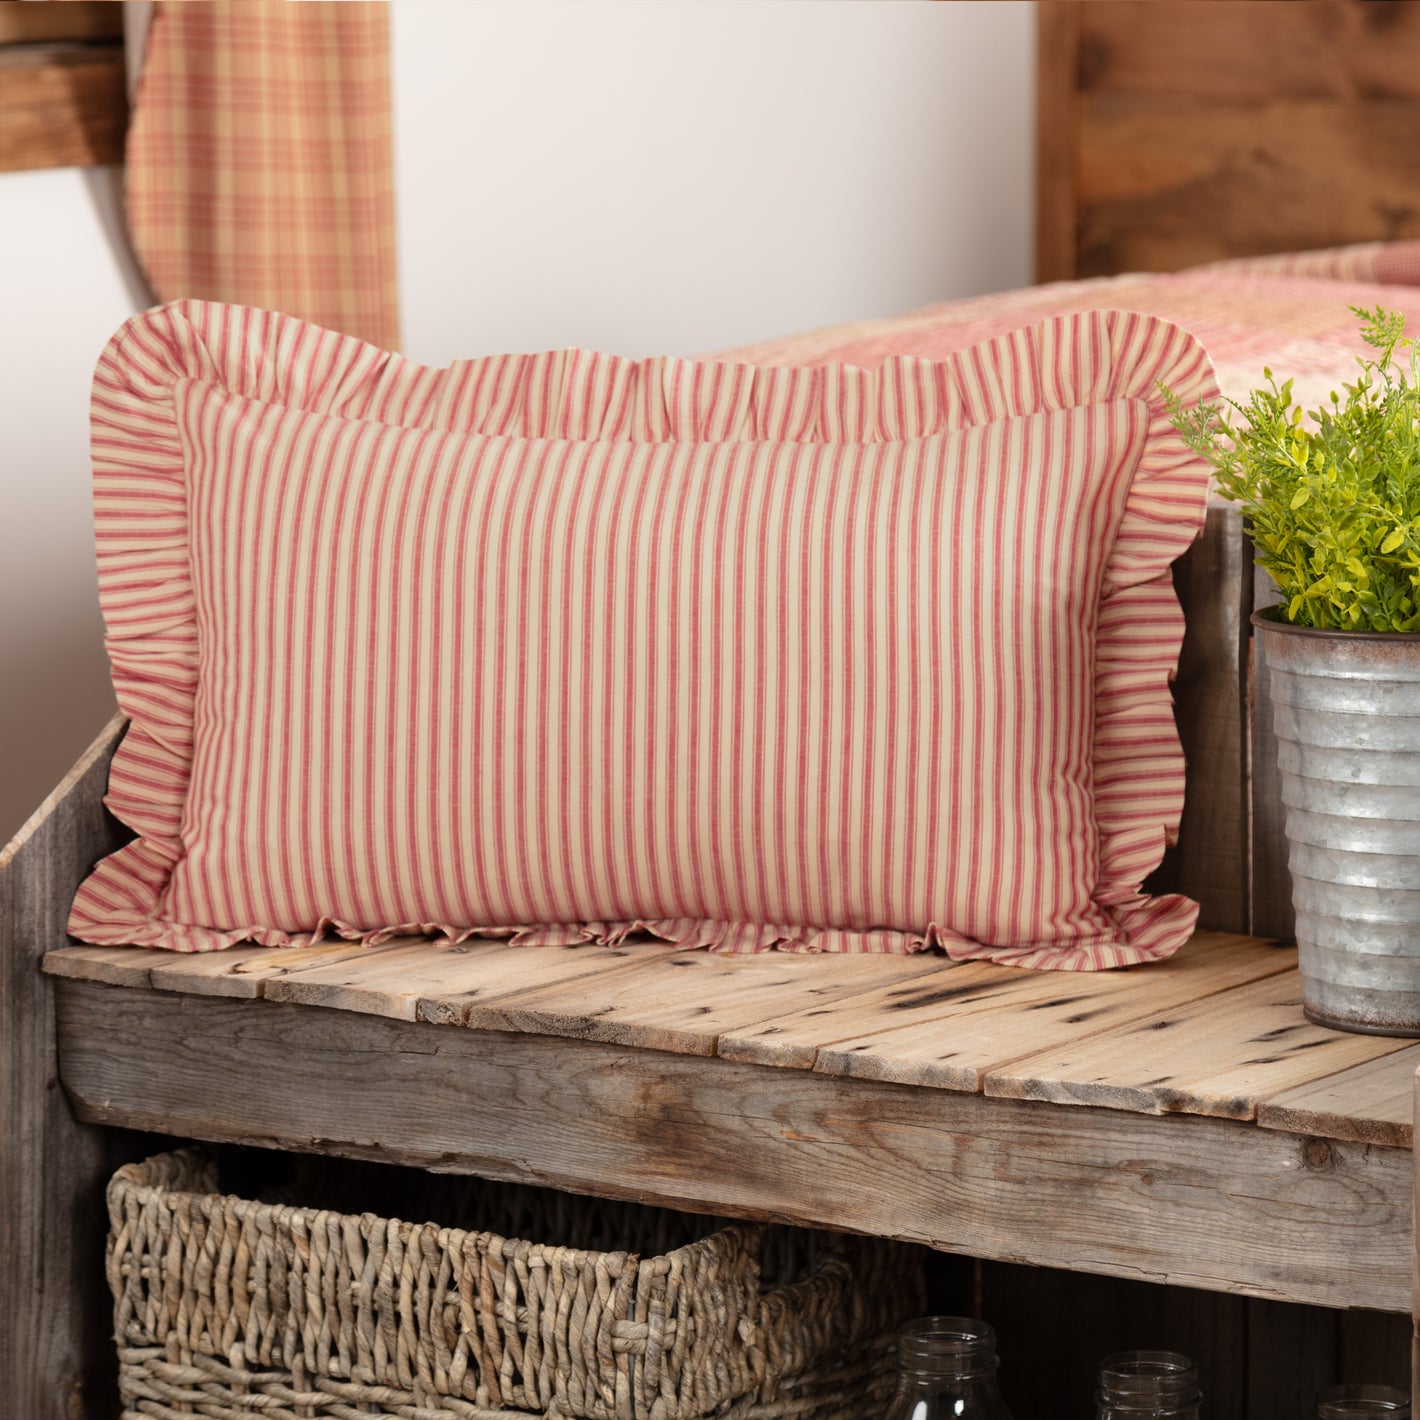 April & Olive Sawyer Mill Red Ticking Stripe Fabric Pillow 14x22 By VHC Brands